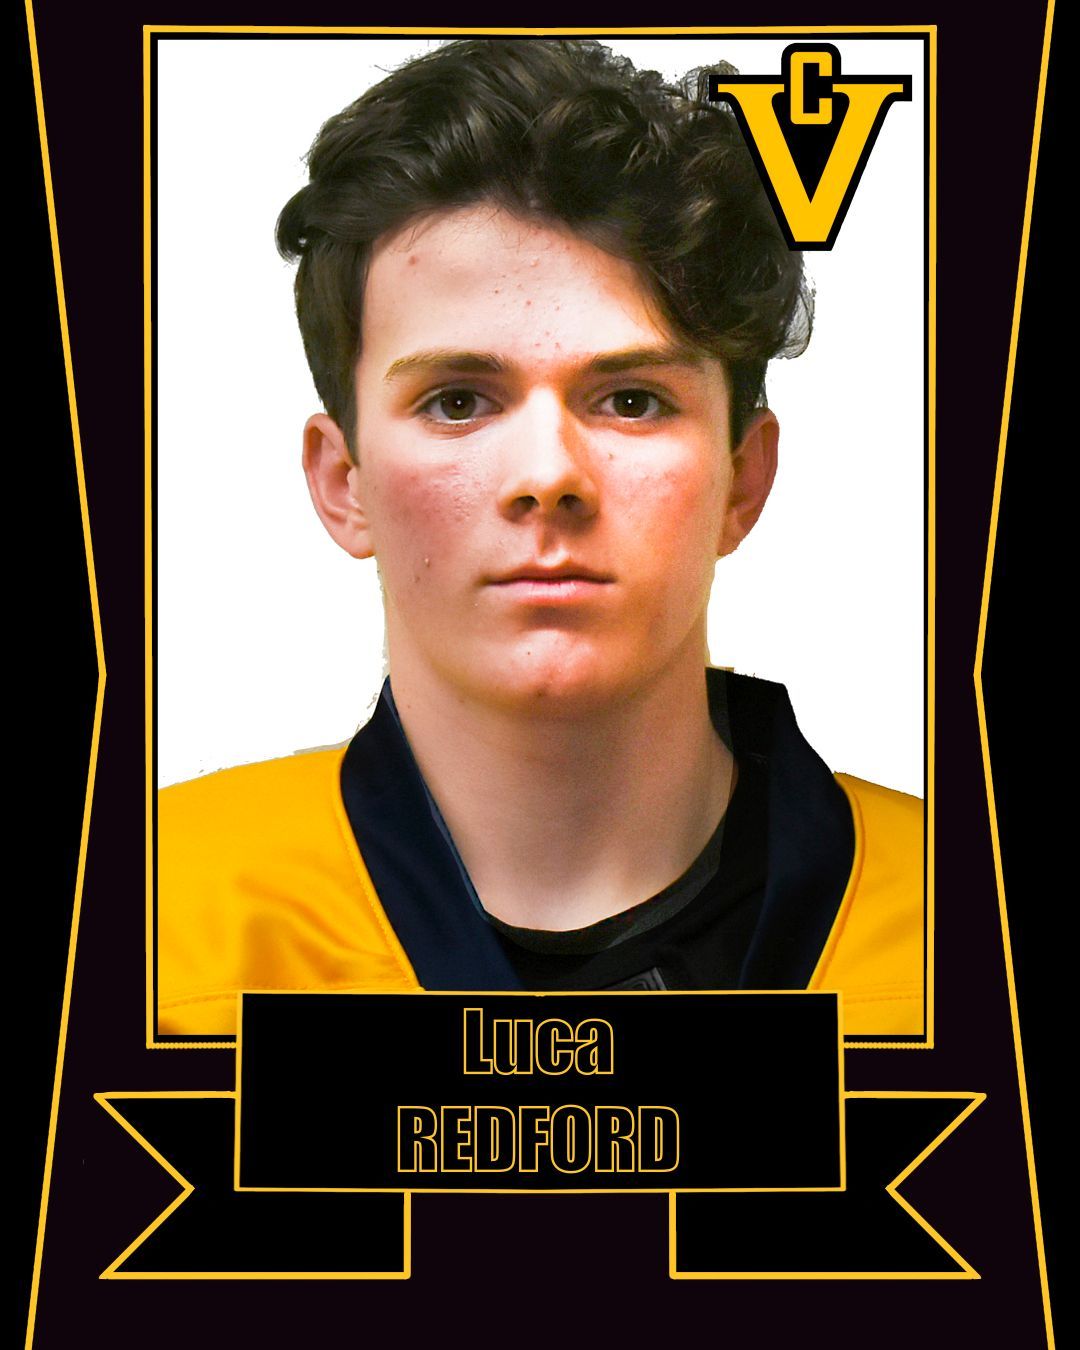 The Cougars have acquired Luca Redford from the Delta Ice Hawks for a PDF. Welcome to the club!